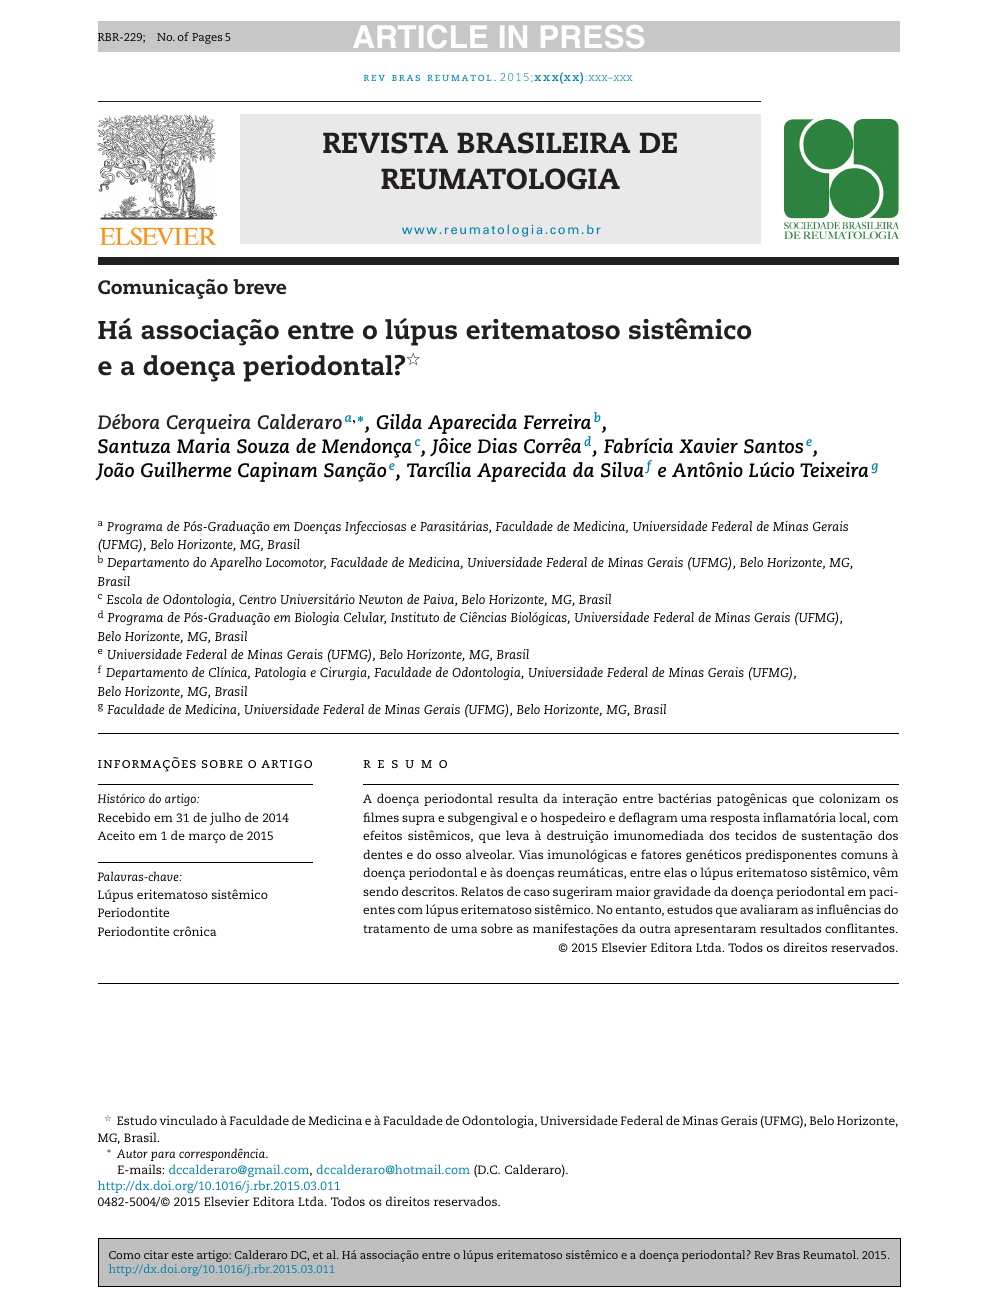 Ha Associacao Entre O Lupus Eritematoso Sistemico E A Doenca Periodontal Topic Of Research Paper In Educational Sciences Download Scholarly Article Pdf And Read For Free On Cyberleninka Open Science Hub